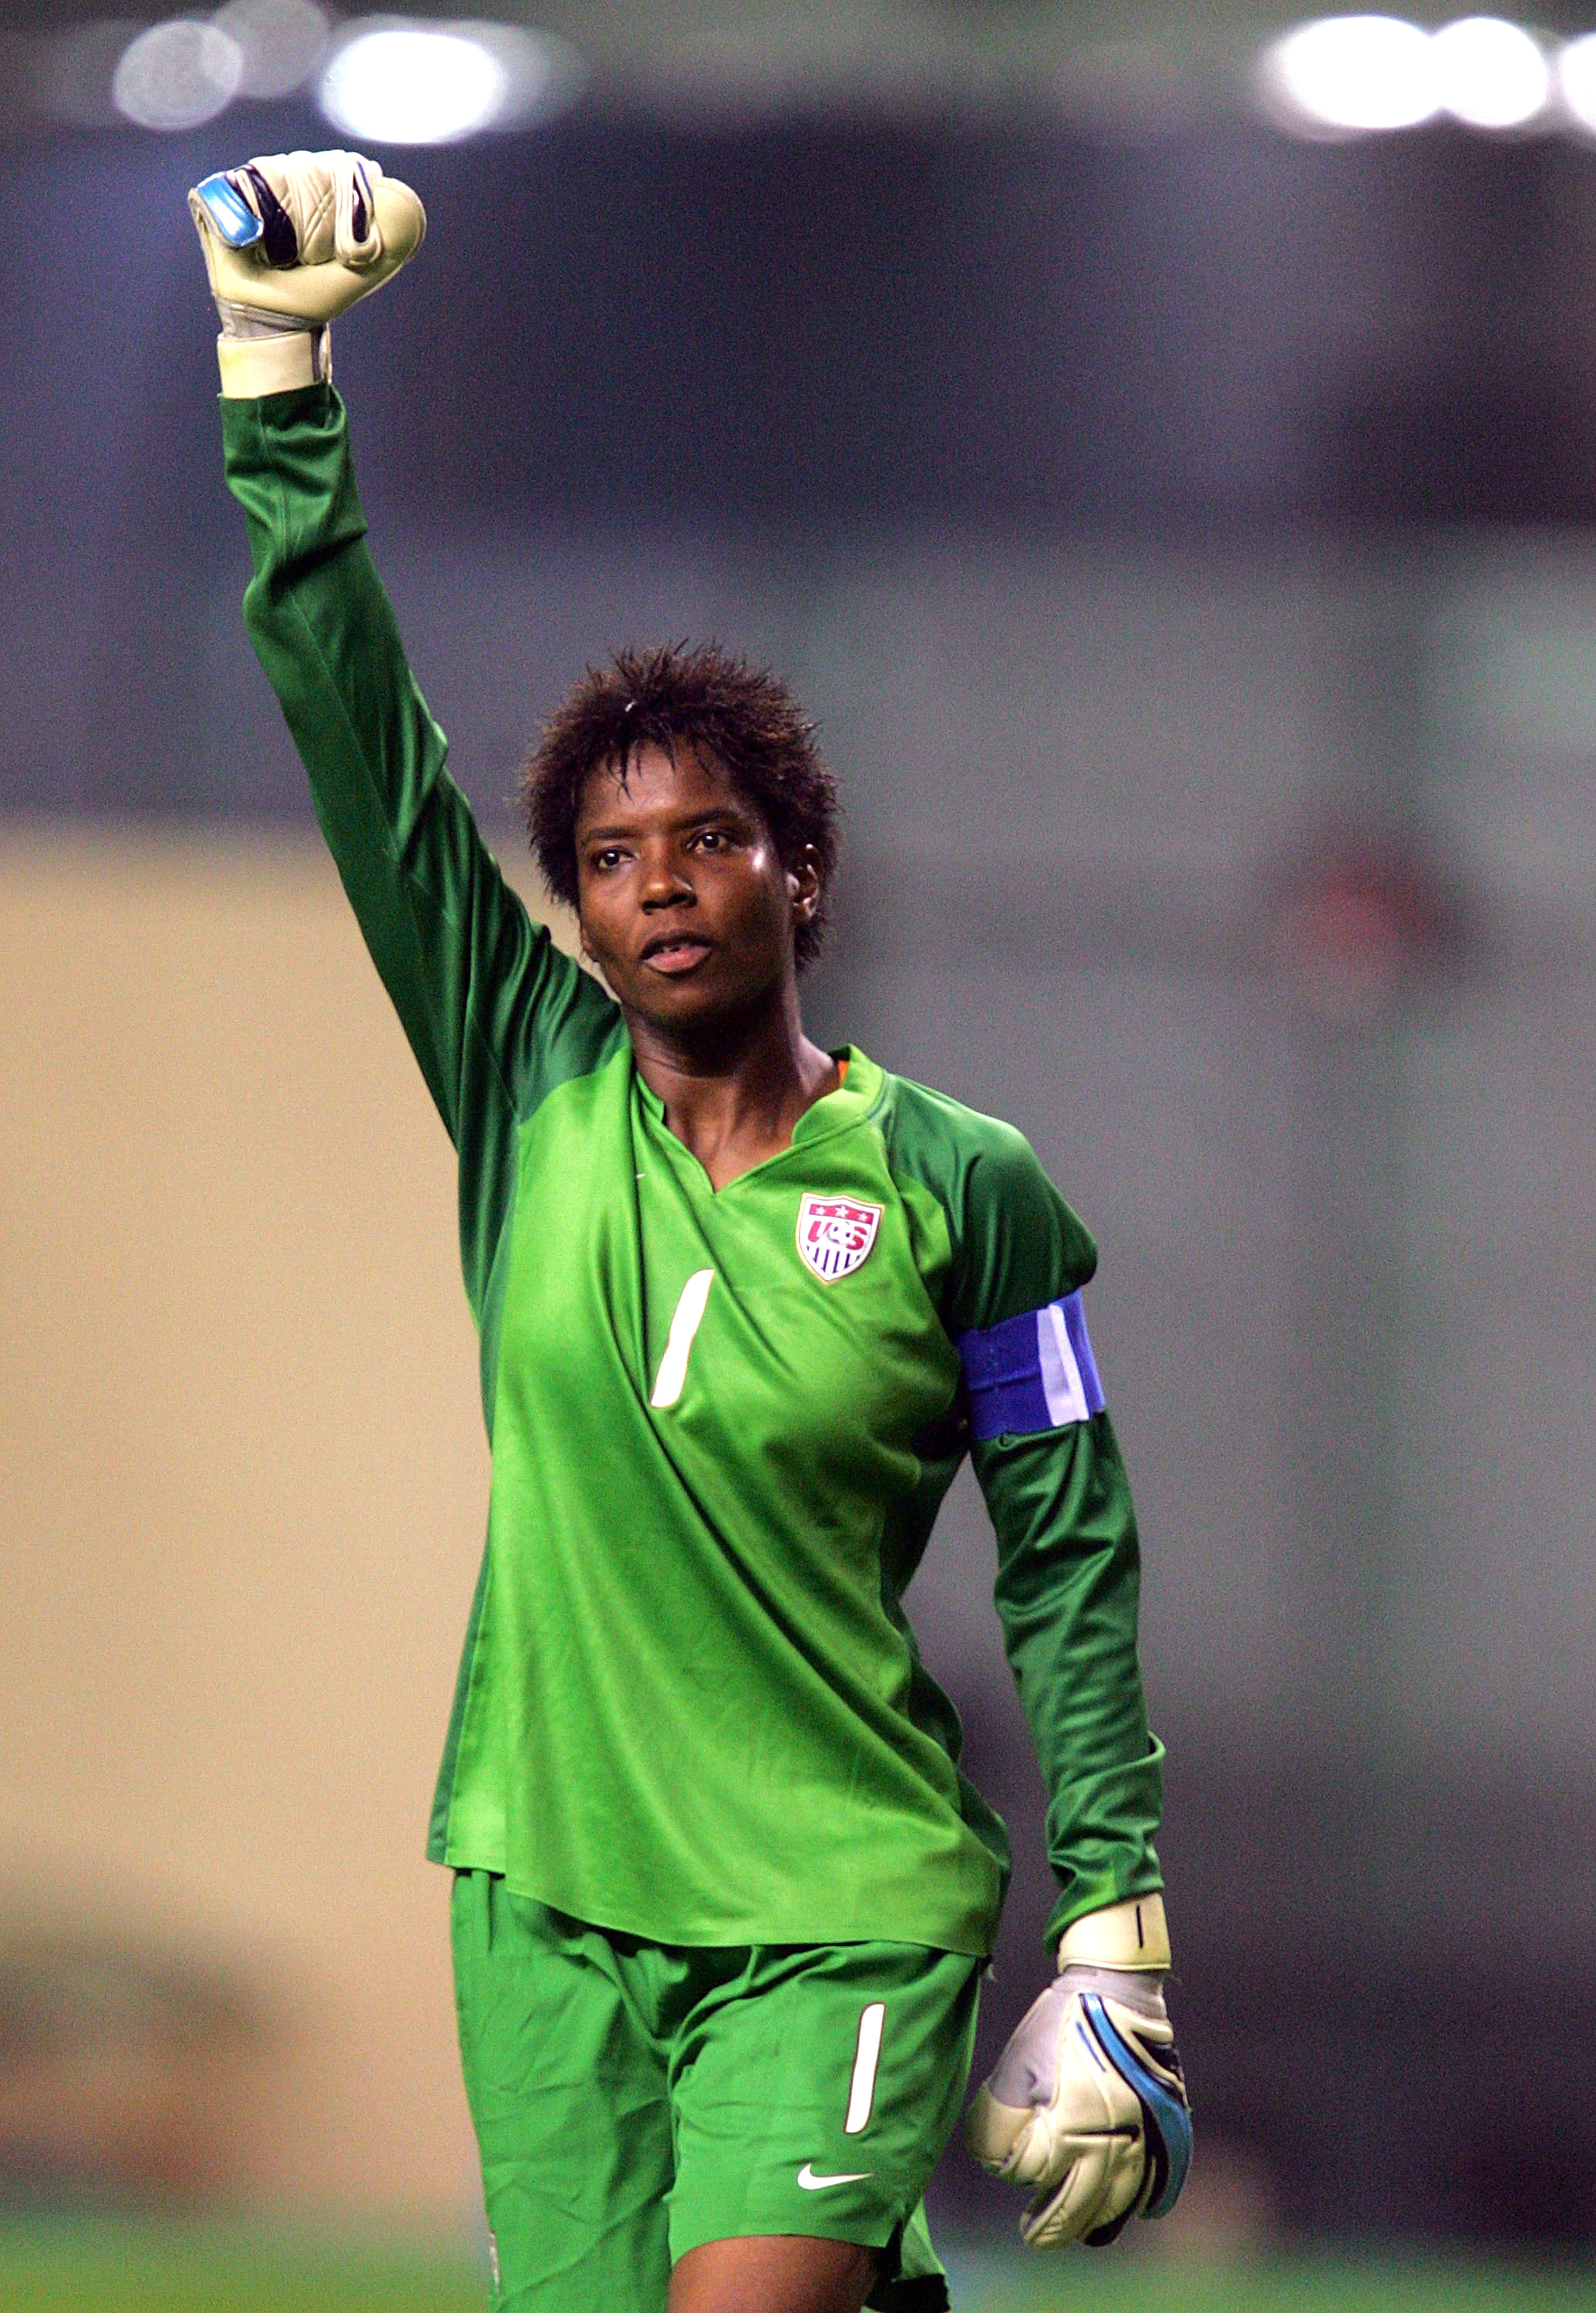 U.S. Goalkeeper Briana Scurry acknowledges the crowd after her team's 4-1 win against Norway at Hongkou Stadium in Shanghai on September 30, 2007. (Ronald Martinez—Getty Images)